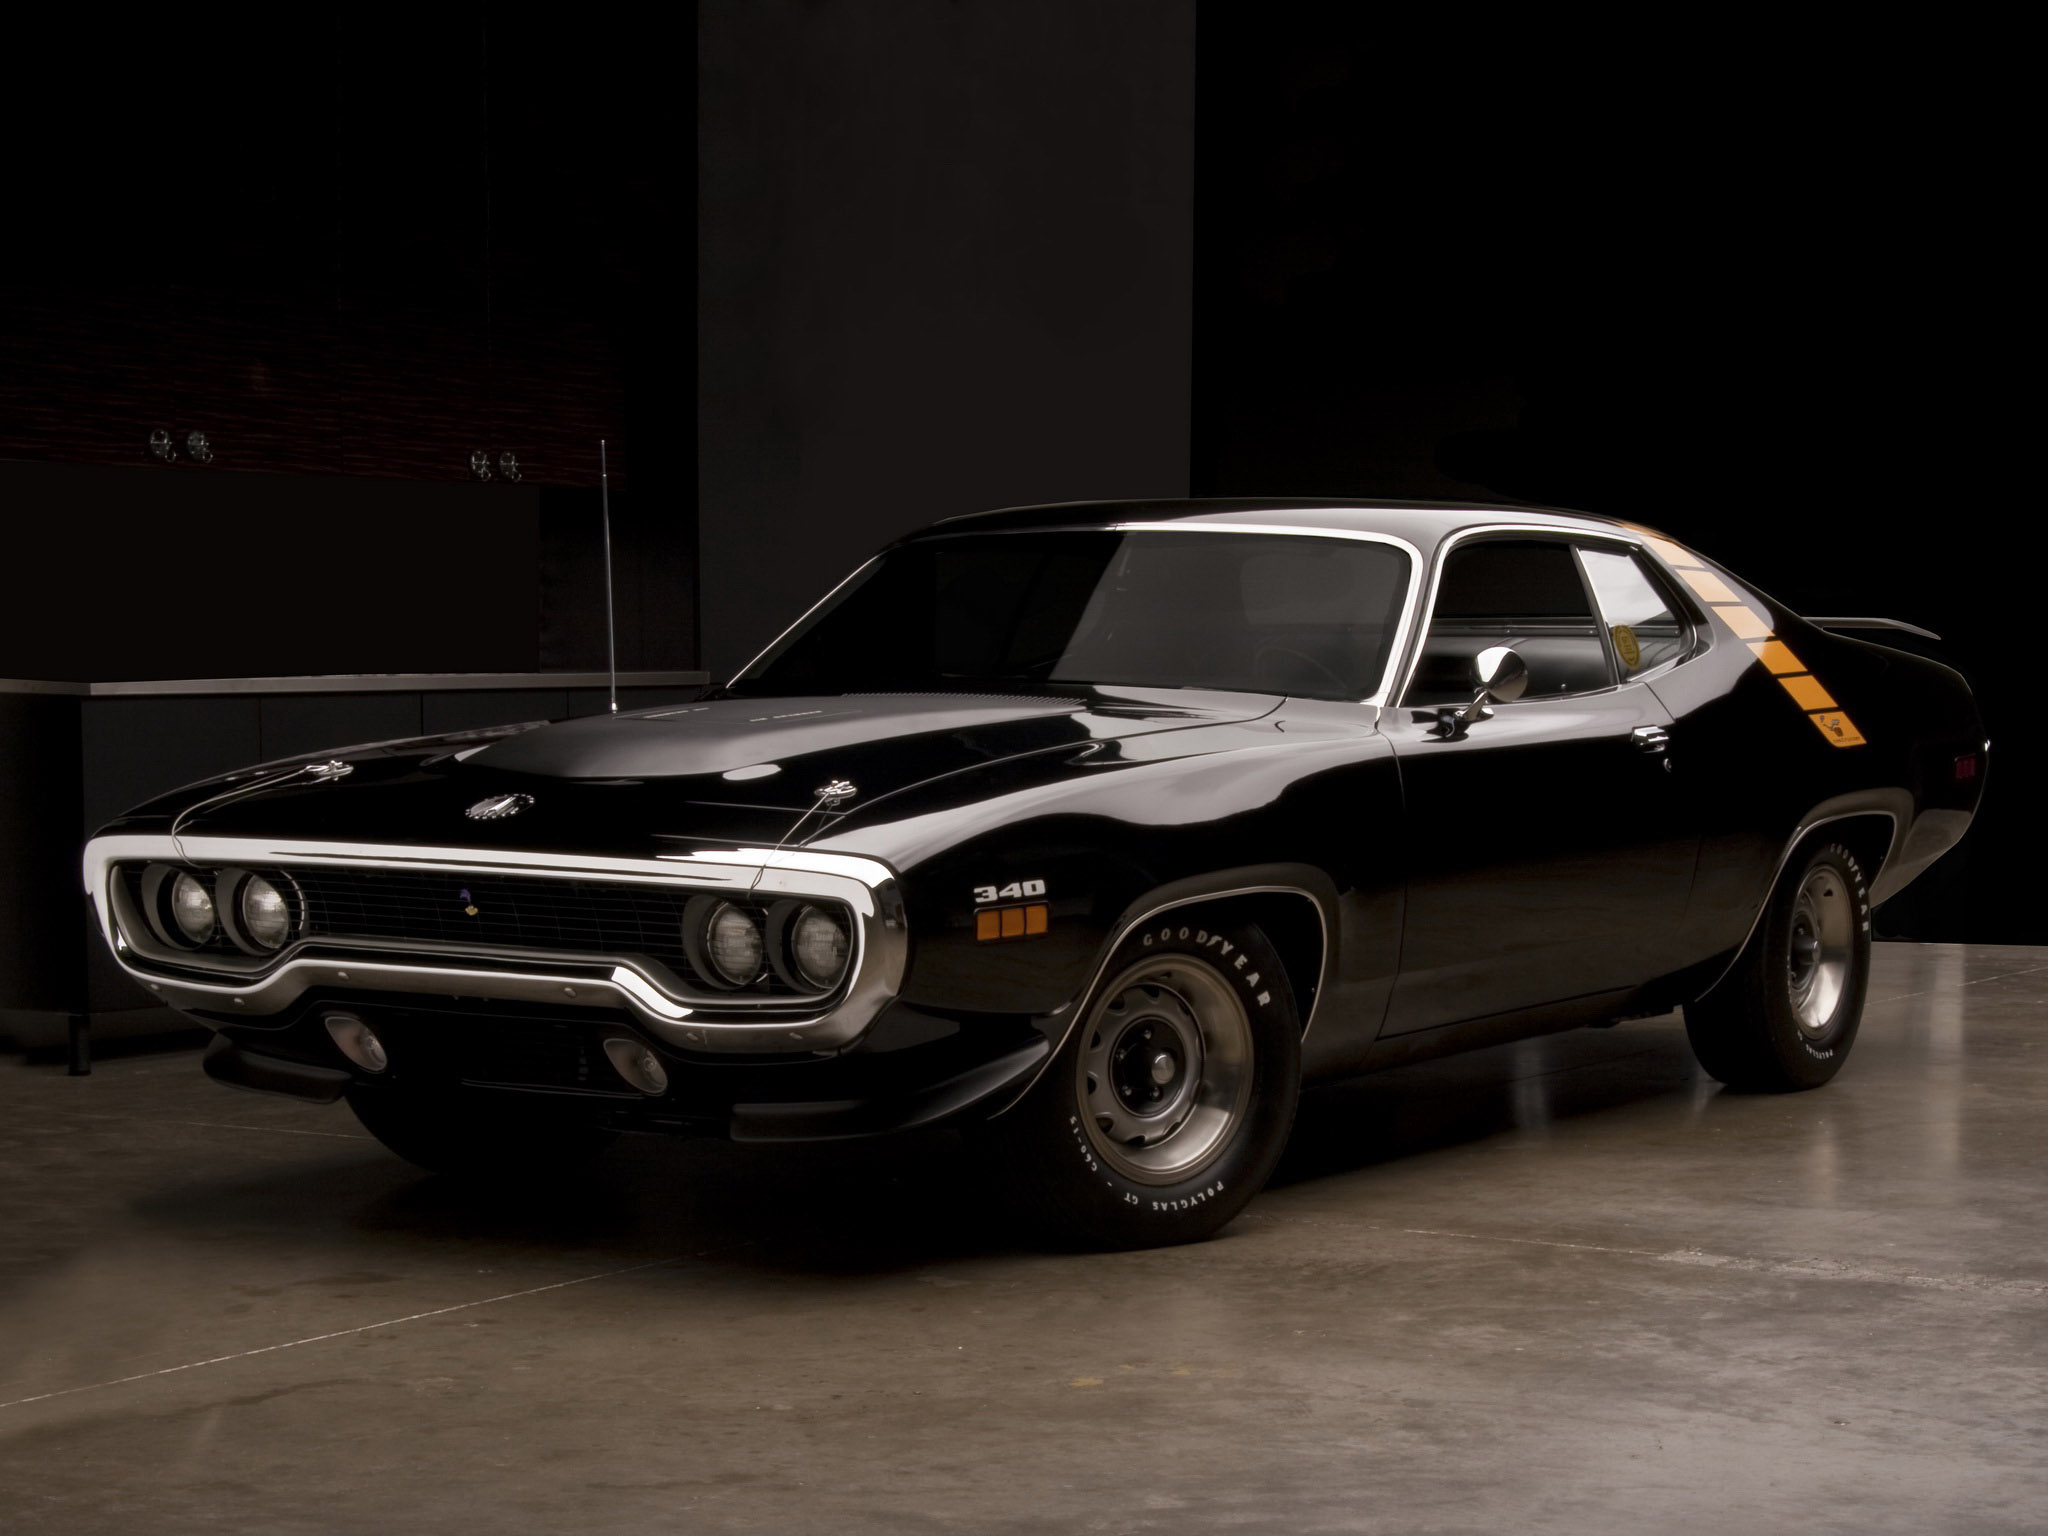 1971 Plymouth Road Runner Backgrounds, Compatible - PC, Mobile, Gadgets| 2048x1536 px